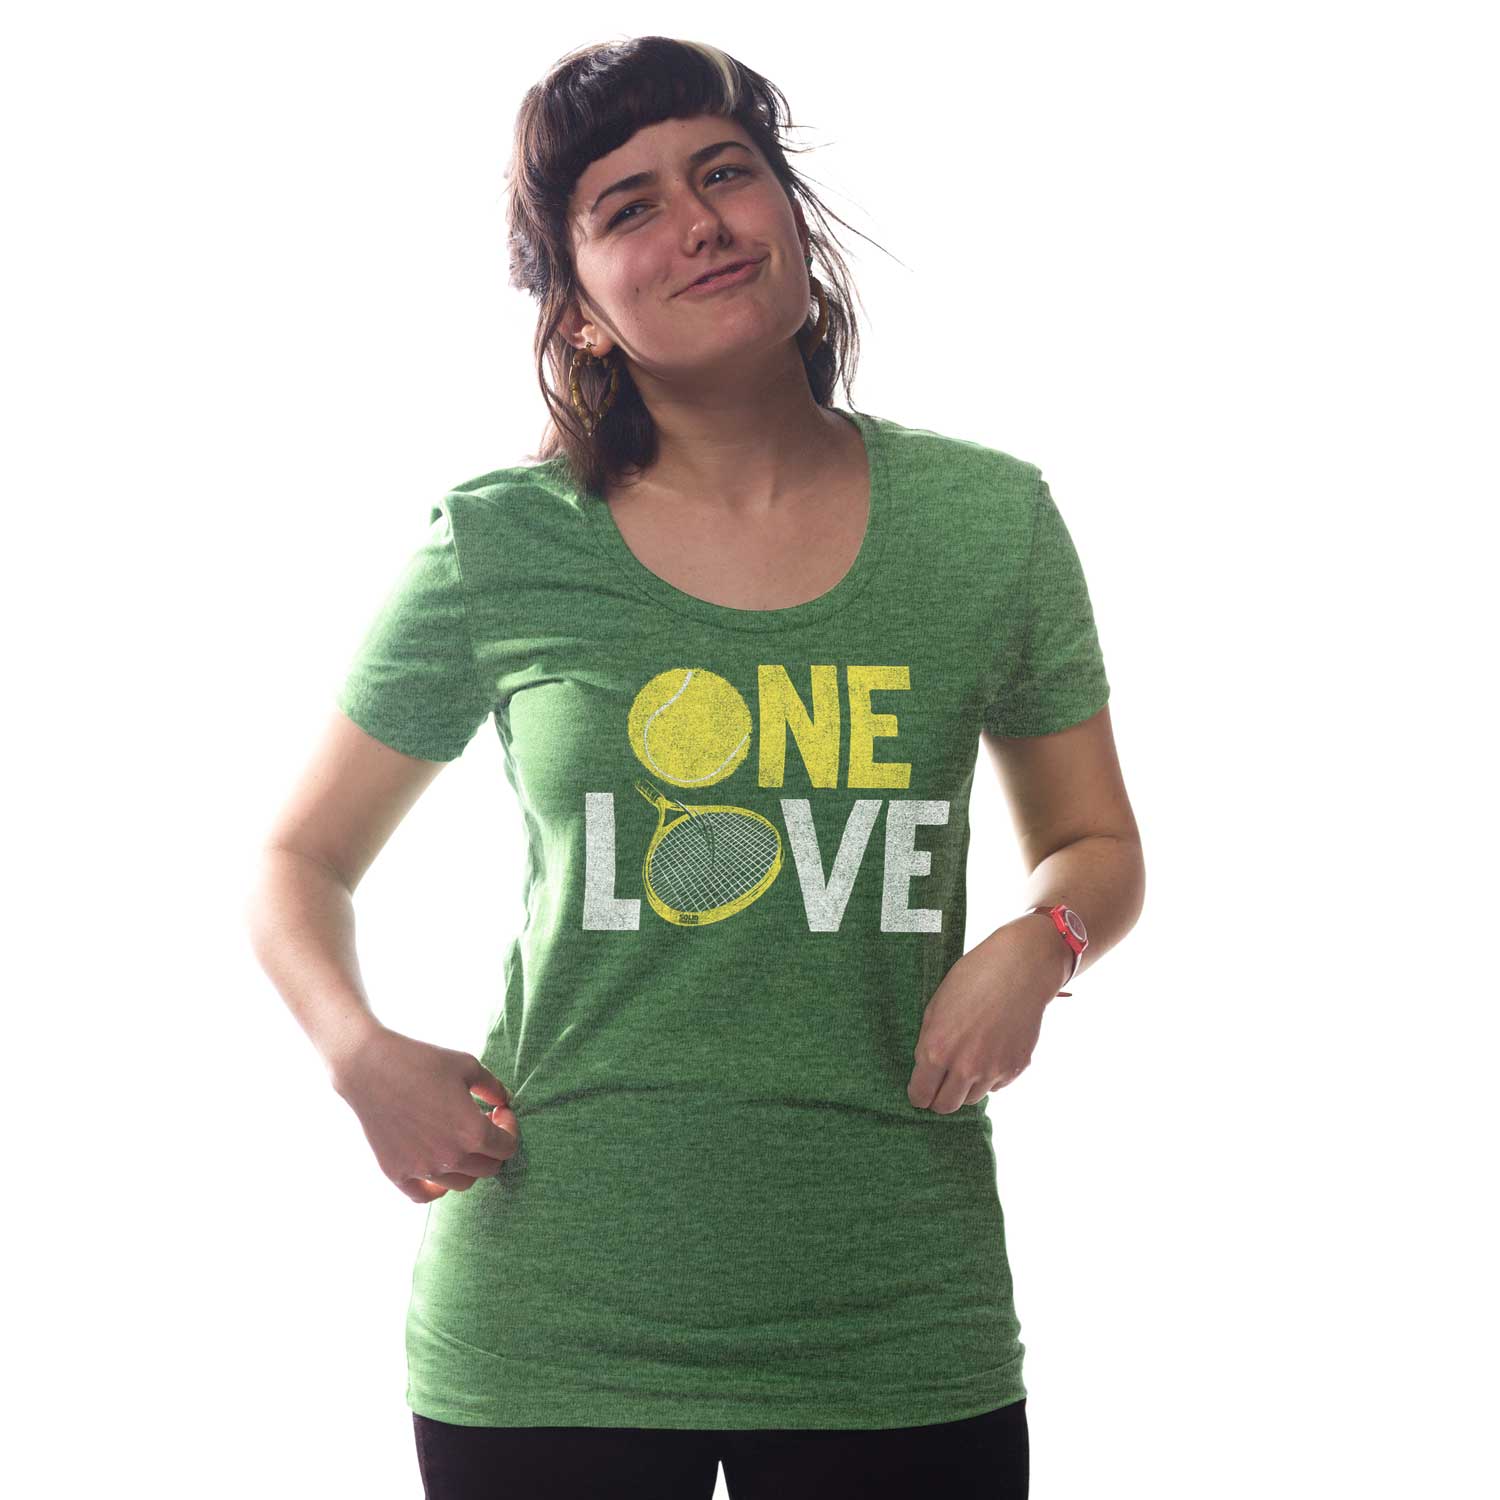 Women's One Love Cool Graphic T-Shirt | Vintage Tennis Racket Triblend Tee on Model | Solid Threads